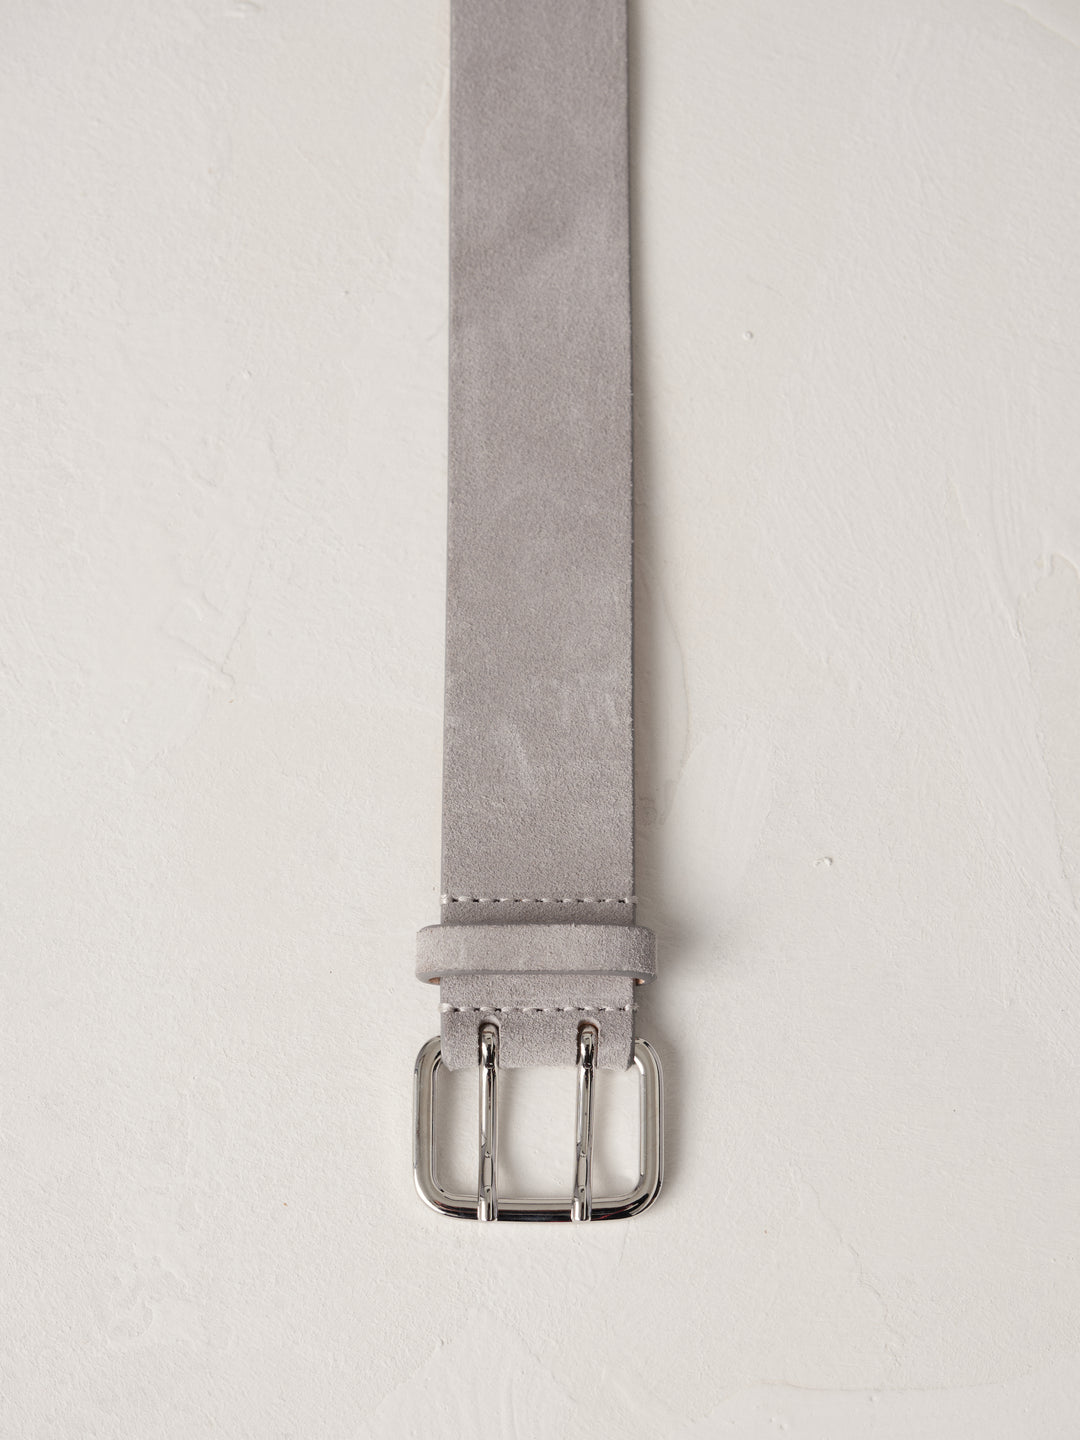 Close-up of Déhanche hutch suede belt in light grey with a silver buckle, emphasizing the luxurious suede material and elegant design details.